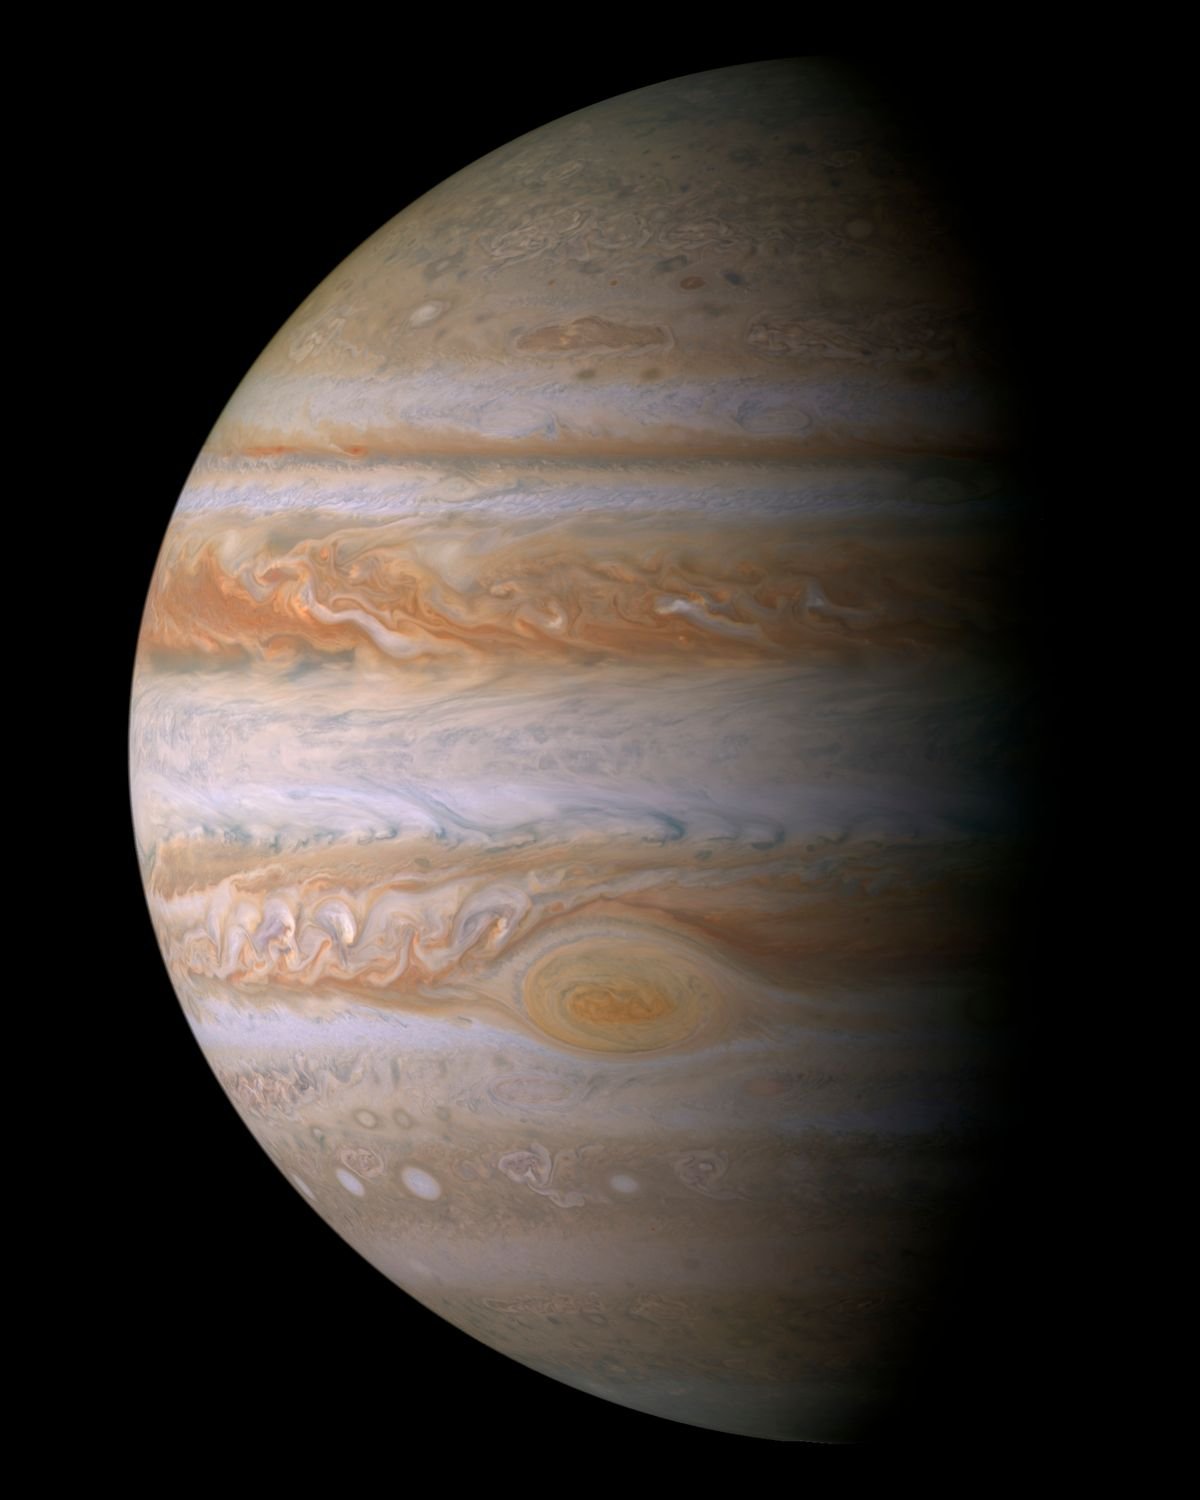 Jupiter’s Great Red Spot: A 300-year-old cyclone persists but is shrinking